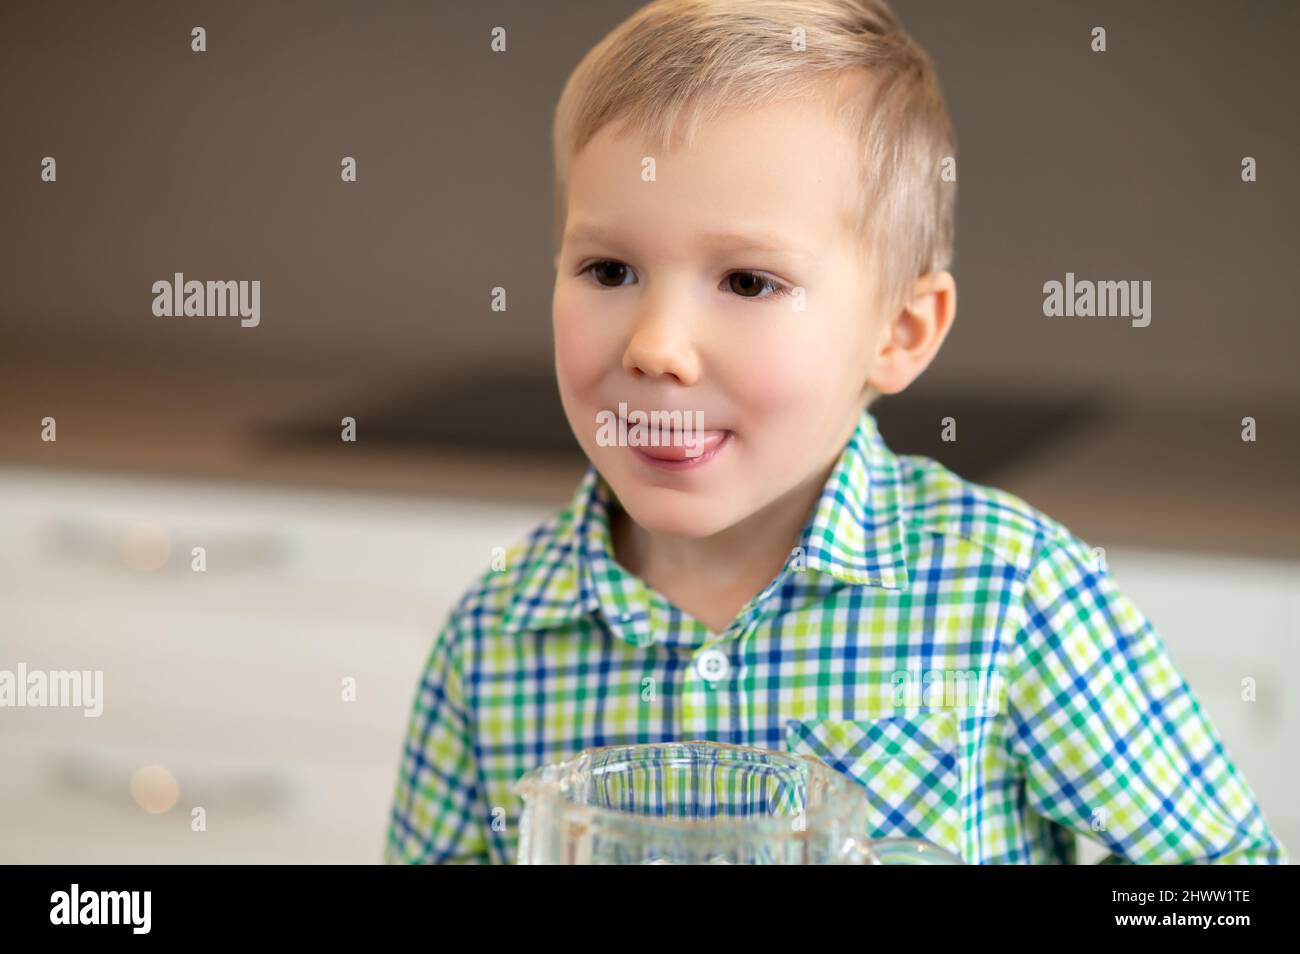 Kid with his tongue stuck out staring into the distance Stock Photo